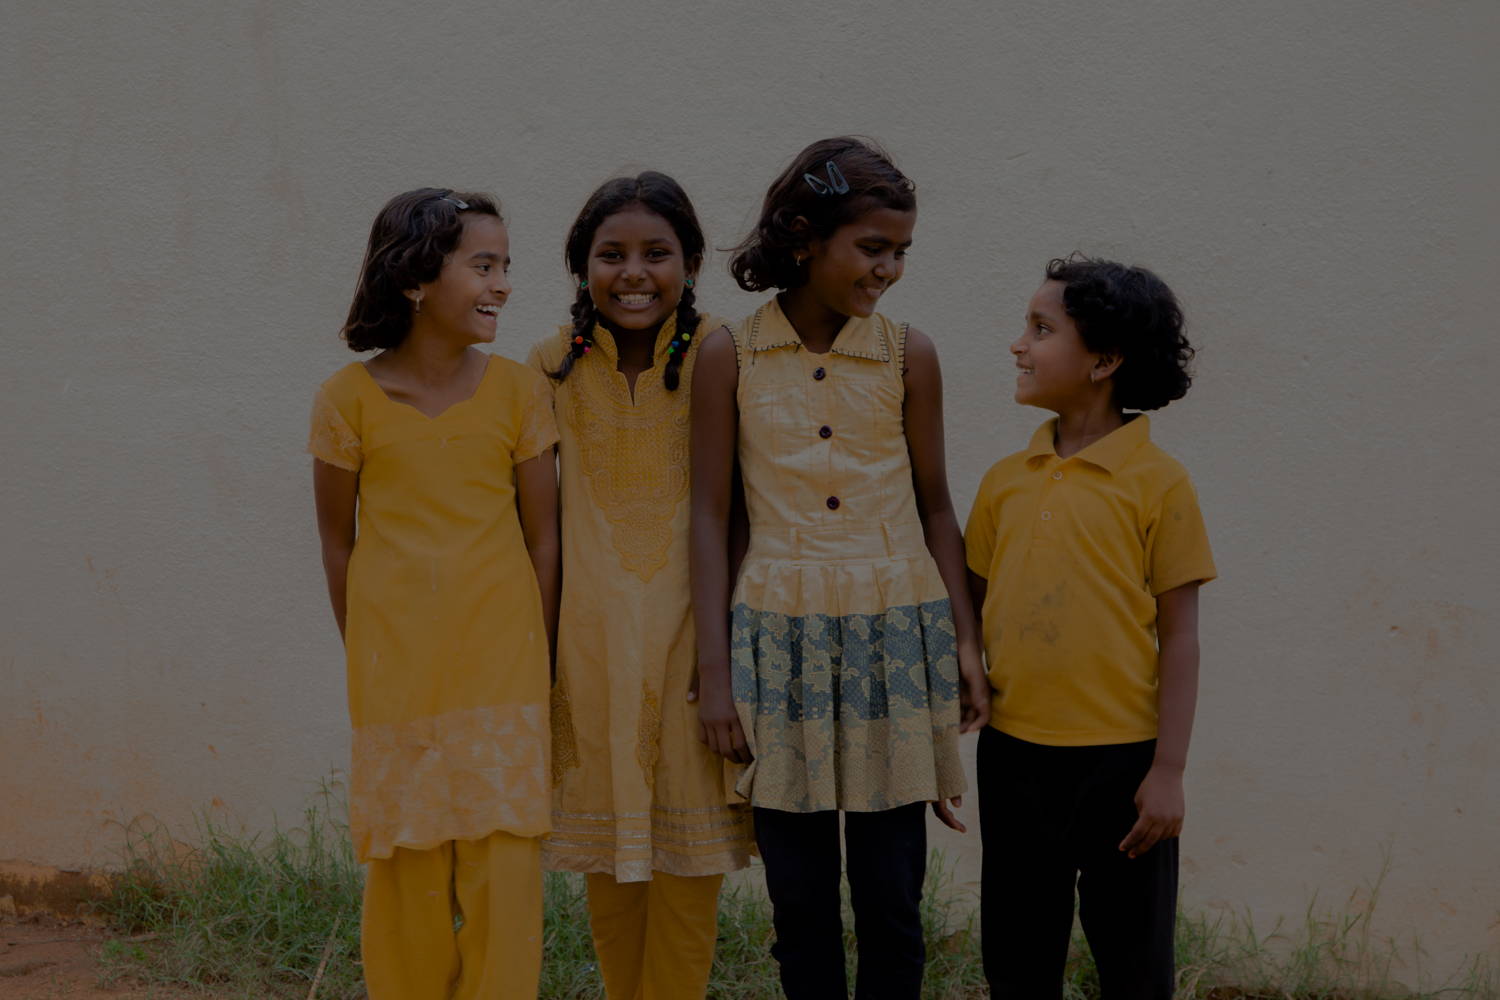 3 young Indian girls, hold hands while smiling, laughing, and looking at each other. They are all wearing yellow dresses.